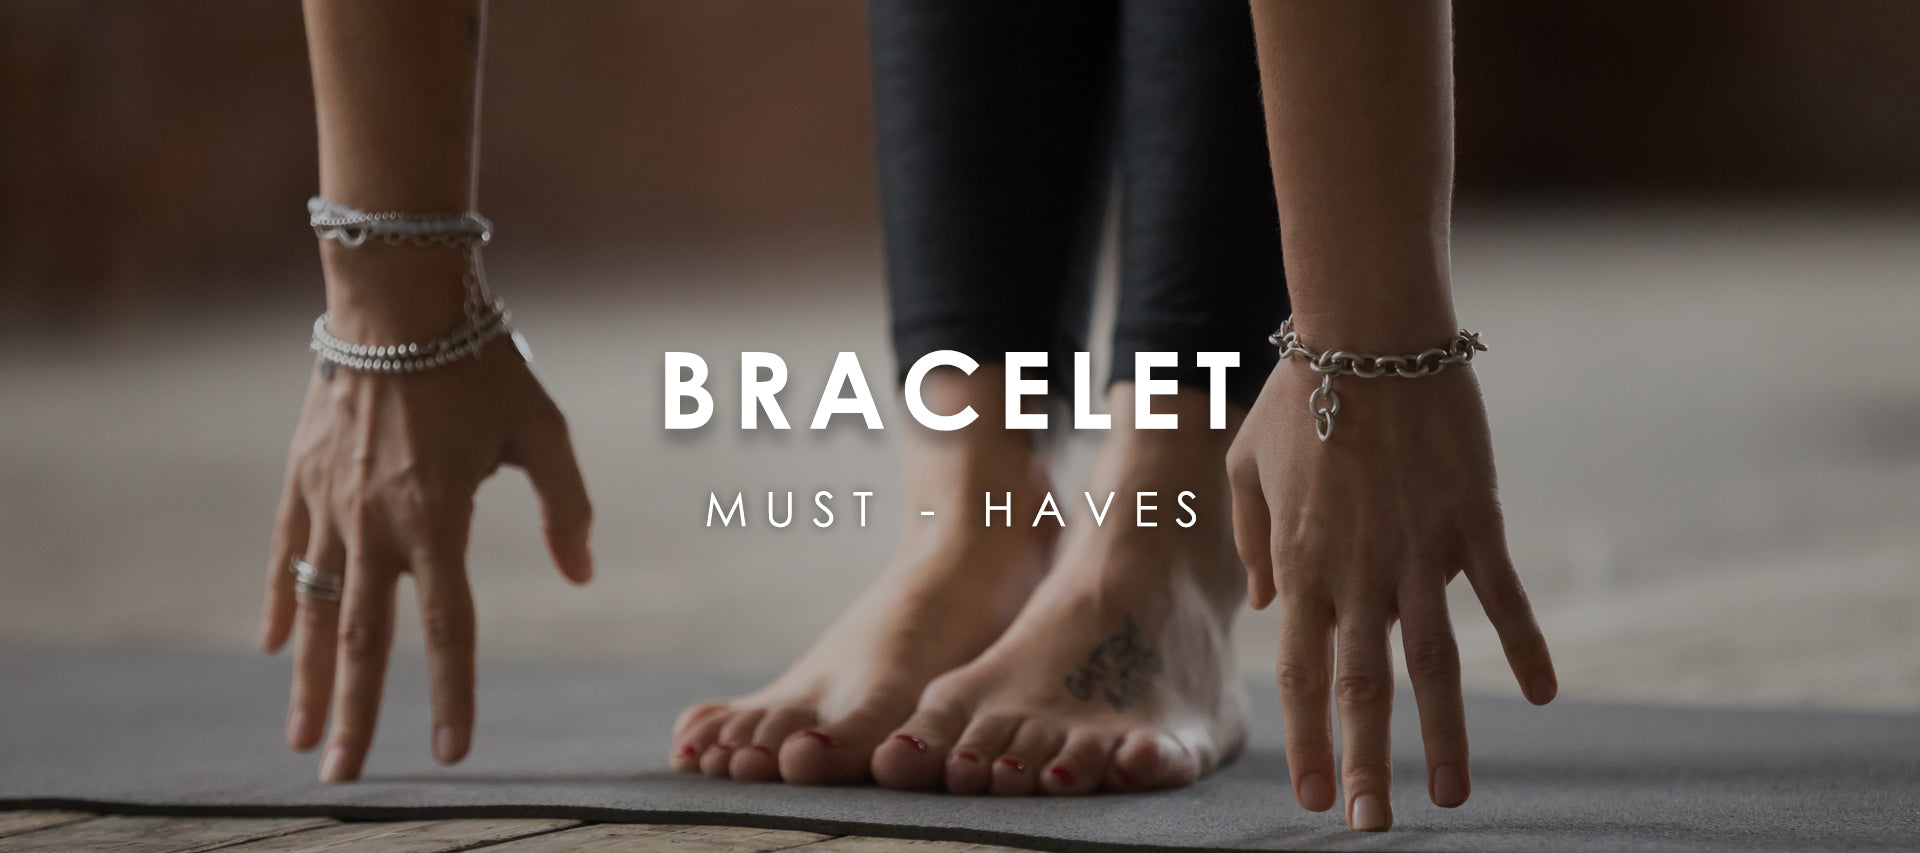 9 Bracelet Types to Add to Your Collection